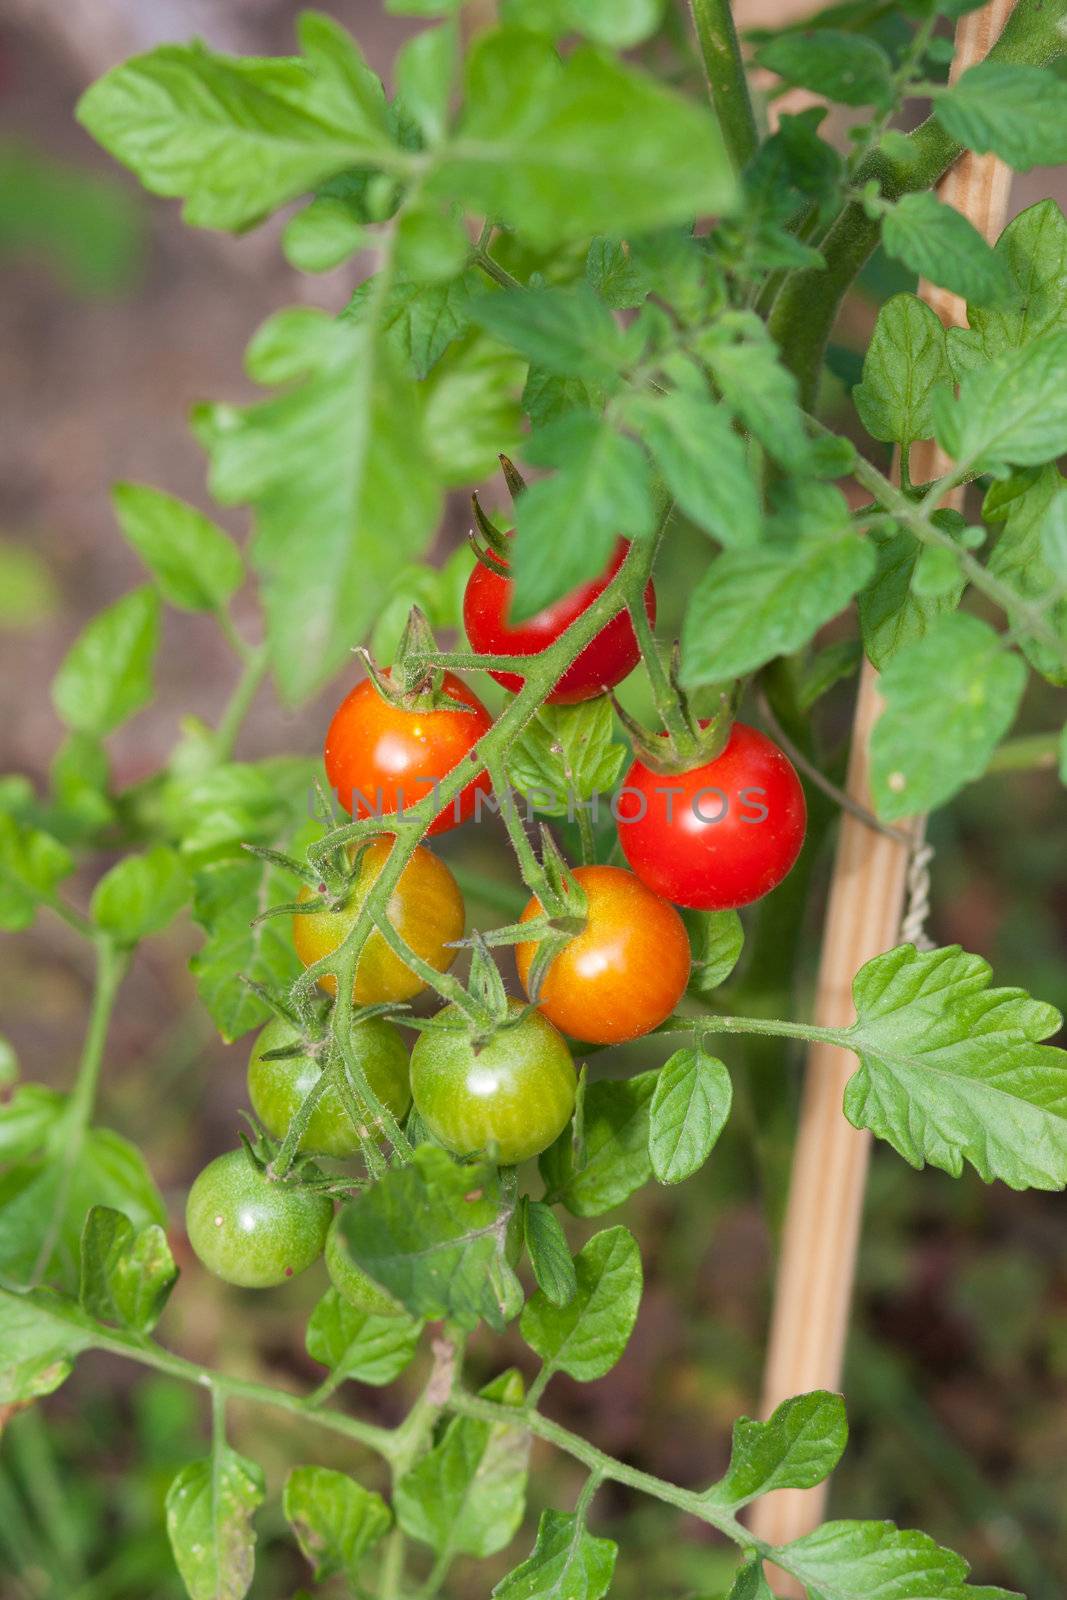 Cluster of cherry tomatoes on the branch